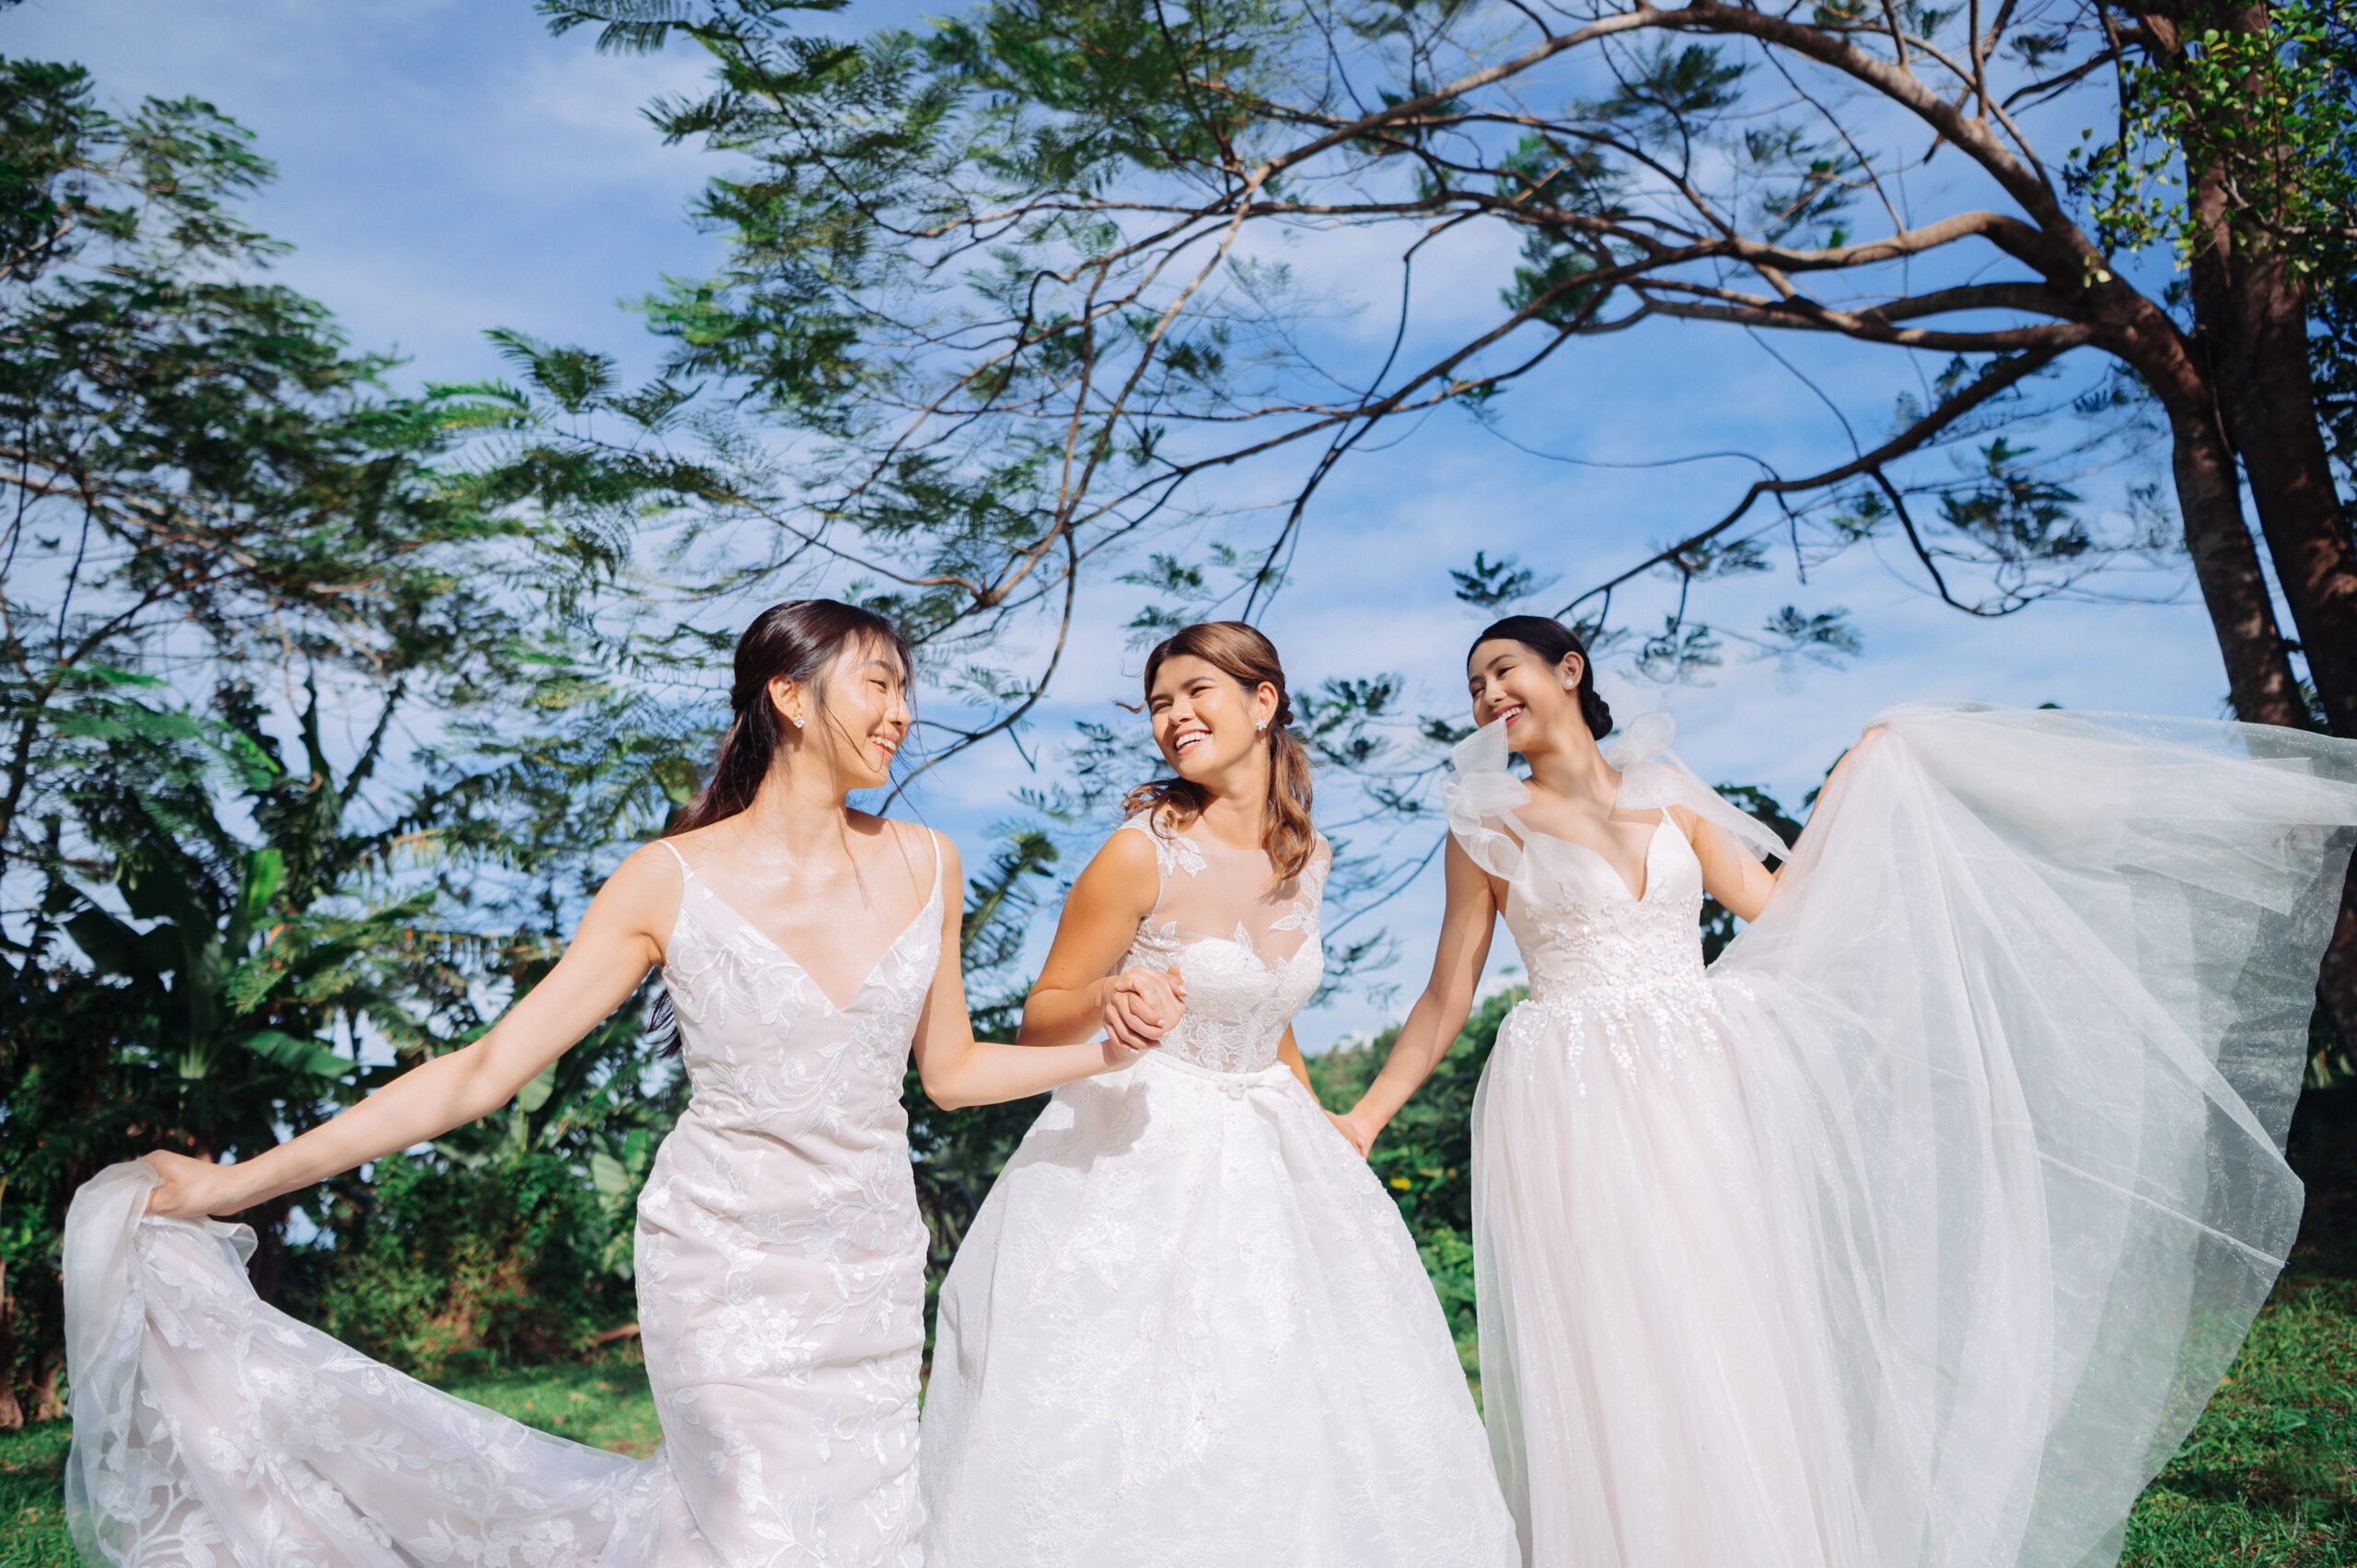 This women-led business lets brides rent designer wedding gowns for the big day